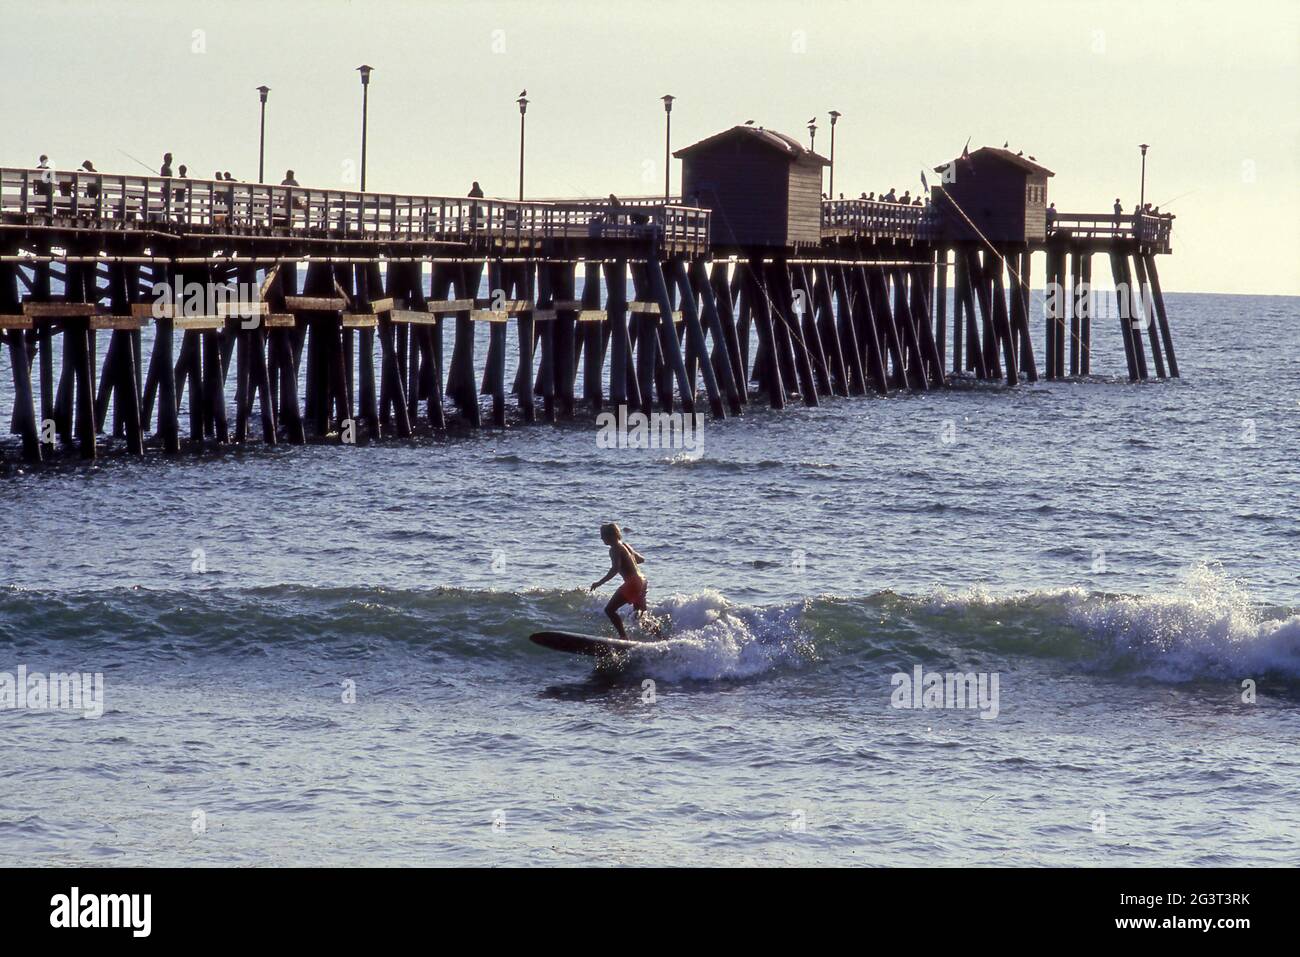 Surfer riding a wave near the San Clemente Pier on coast of Southern California. Stock Photo